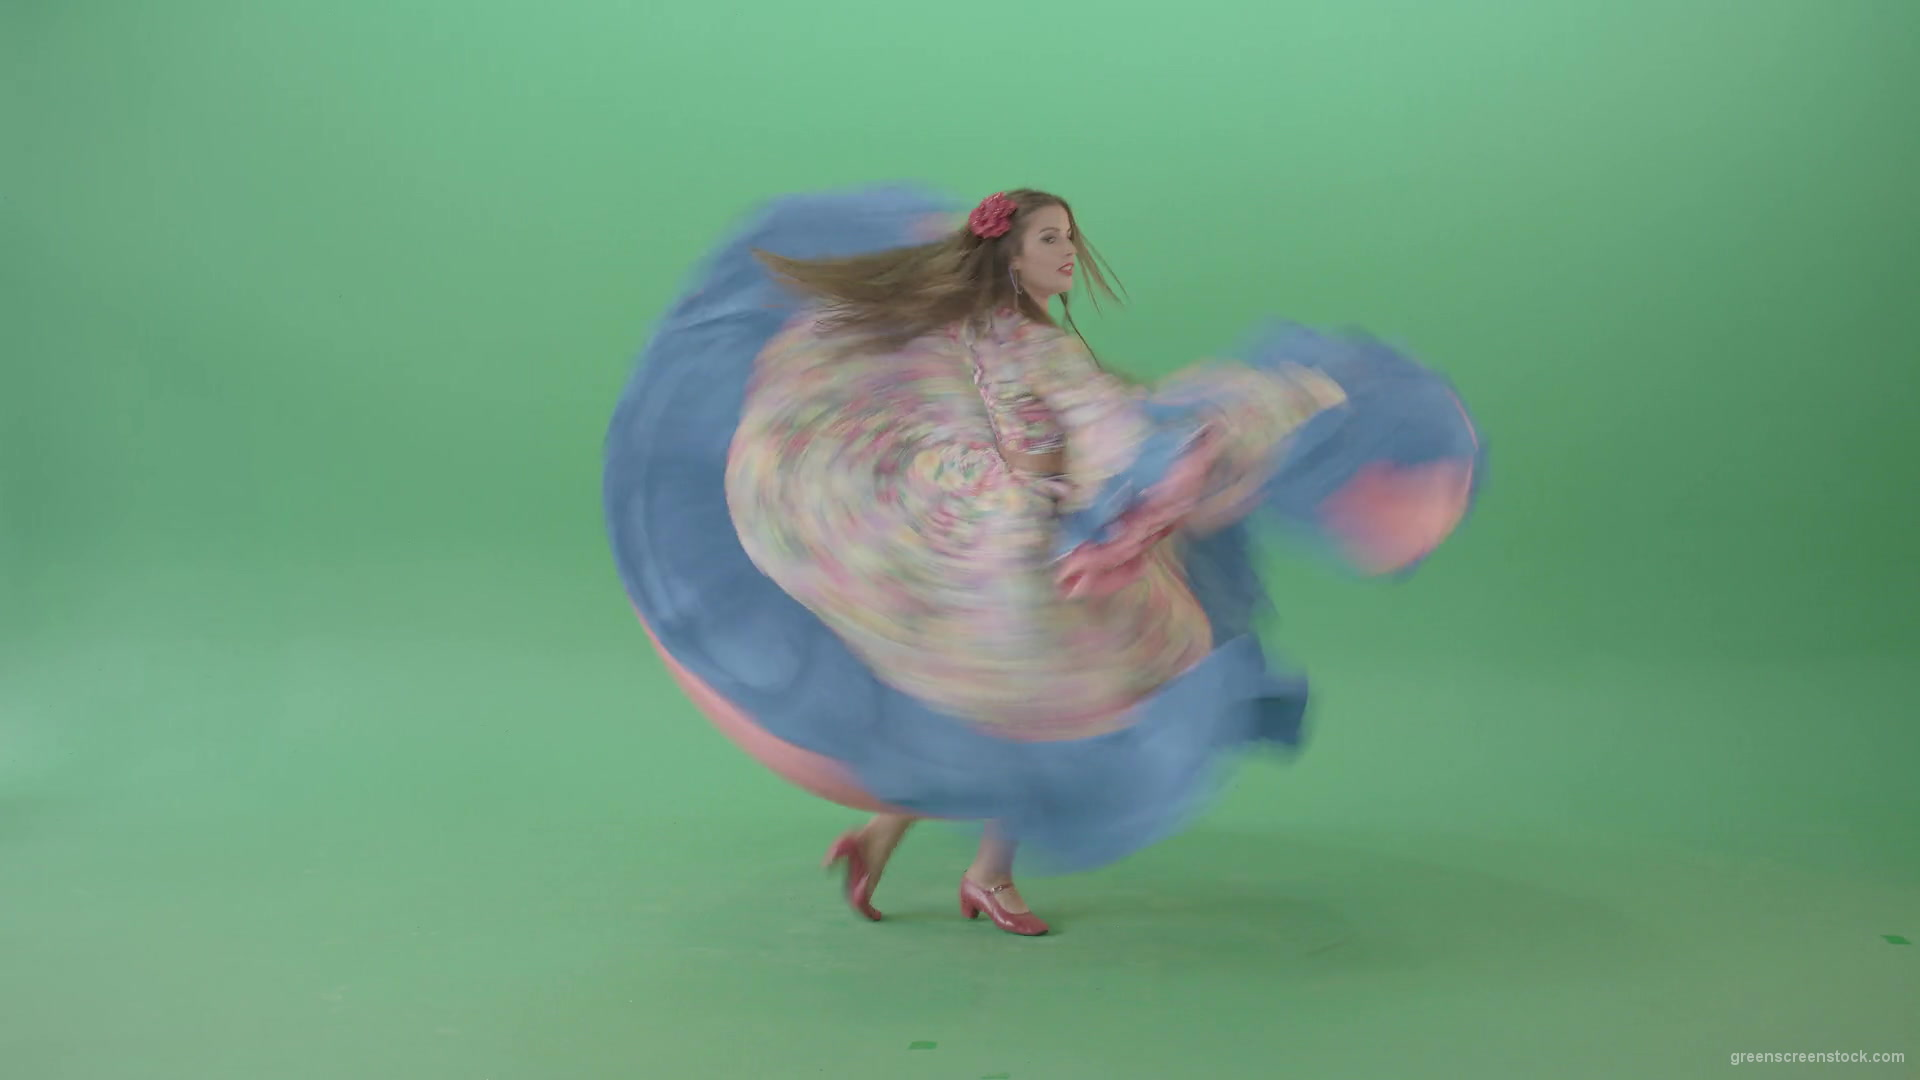 Roma-gipsy-woman-dancing-in-colorful-costume-isolated-on-Green-Screen-4K-Video-Footage-1920_008 Green Screen Stock